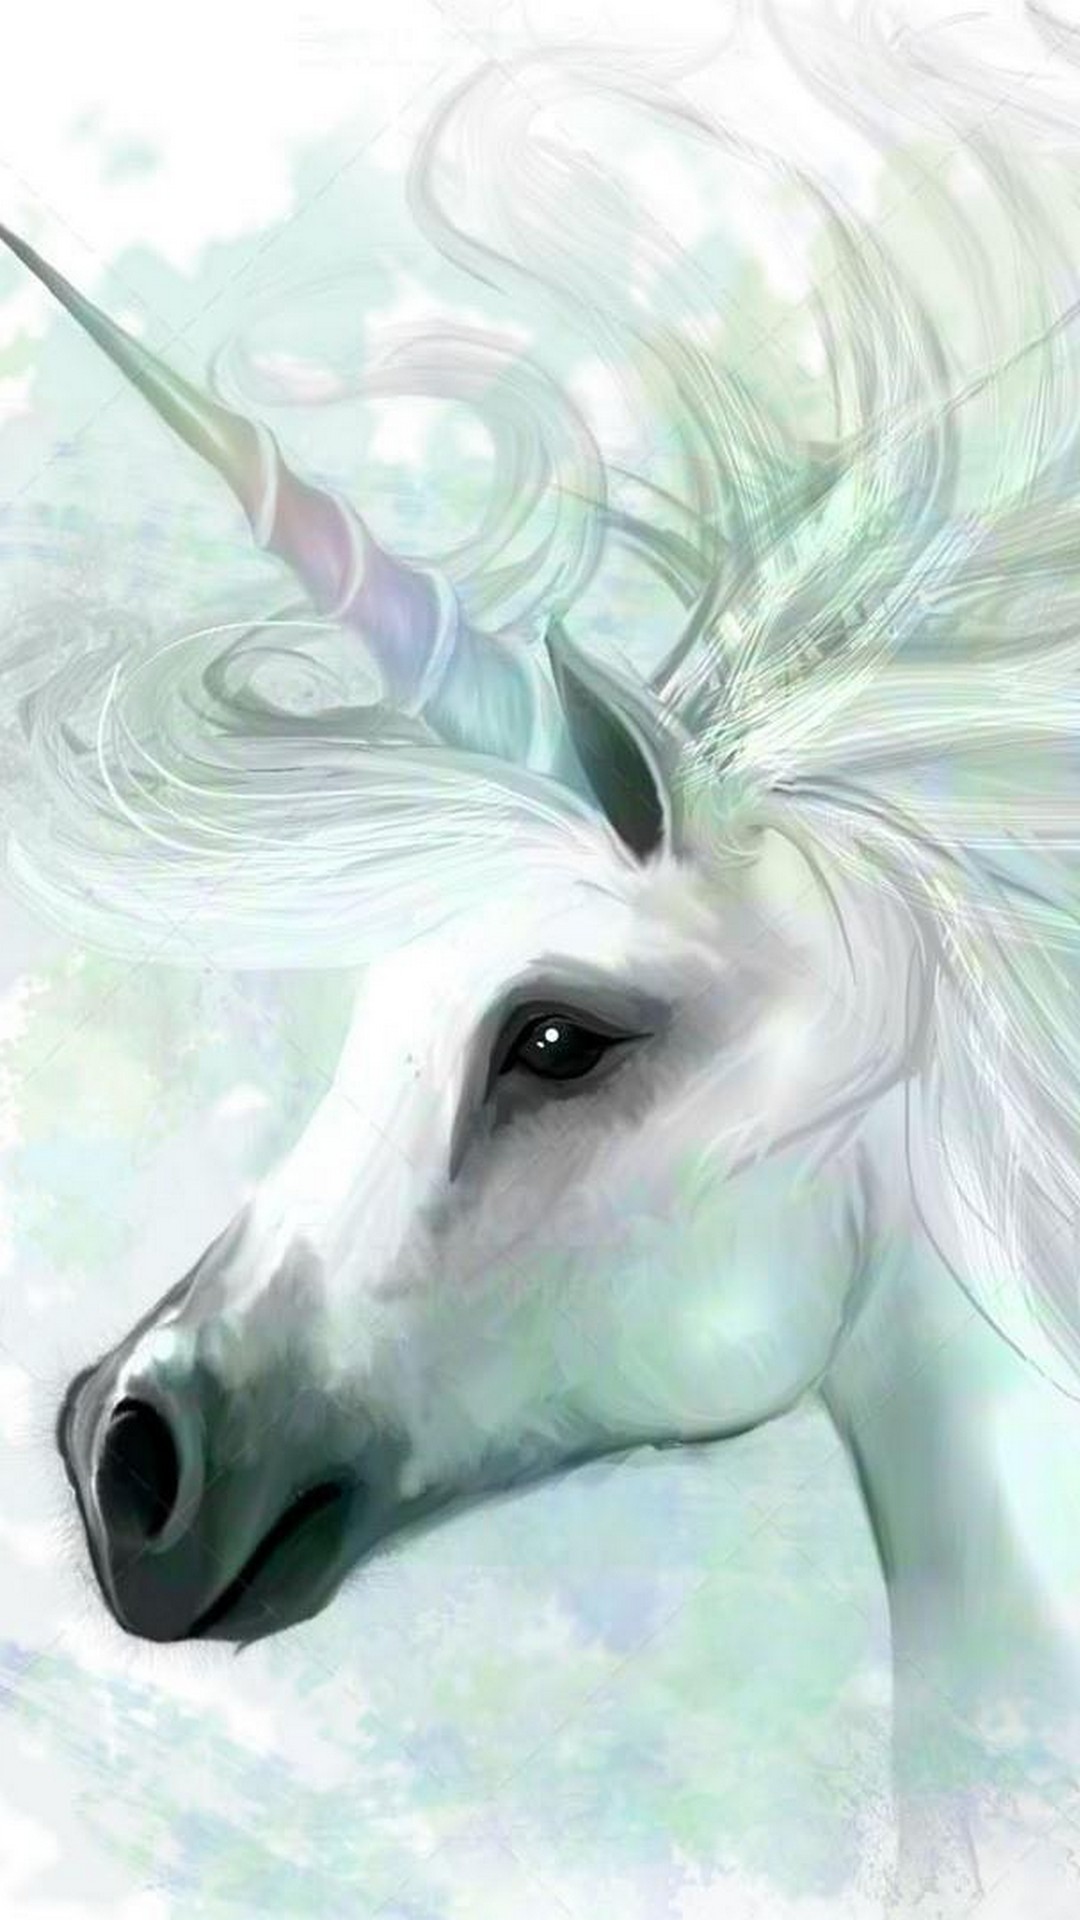 Wallpaper Unicorn for iPhone with high-resolution 1080x1920 pixel. You can use this wallpaper for your iPhone 5, 6, 7, 8, X, XS, XR backgrounds, Mobile Screensaver, or iPad Lock Screen